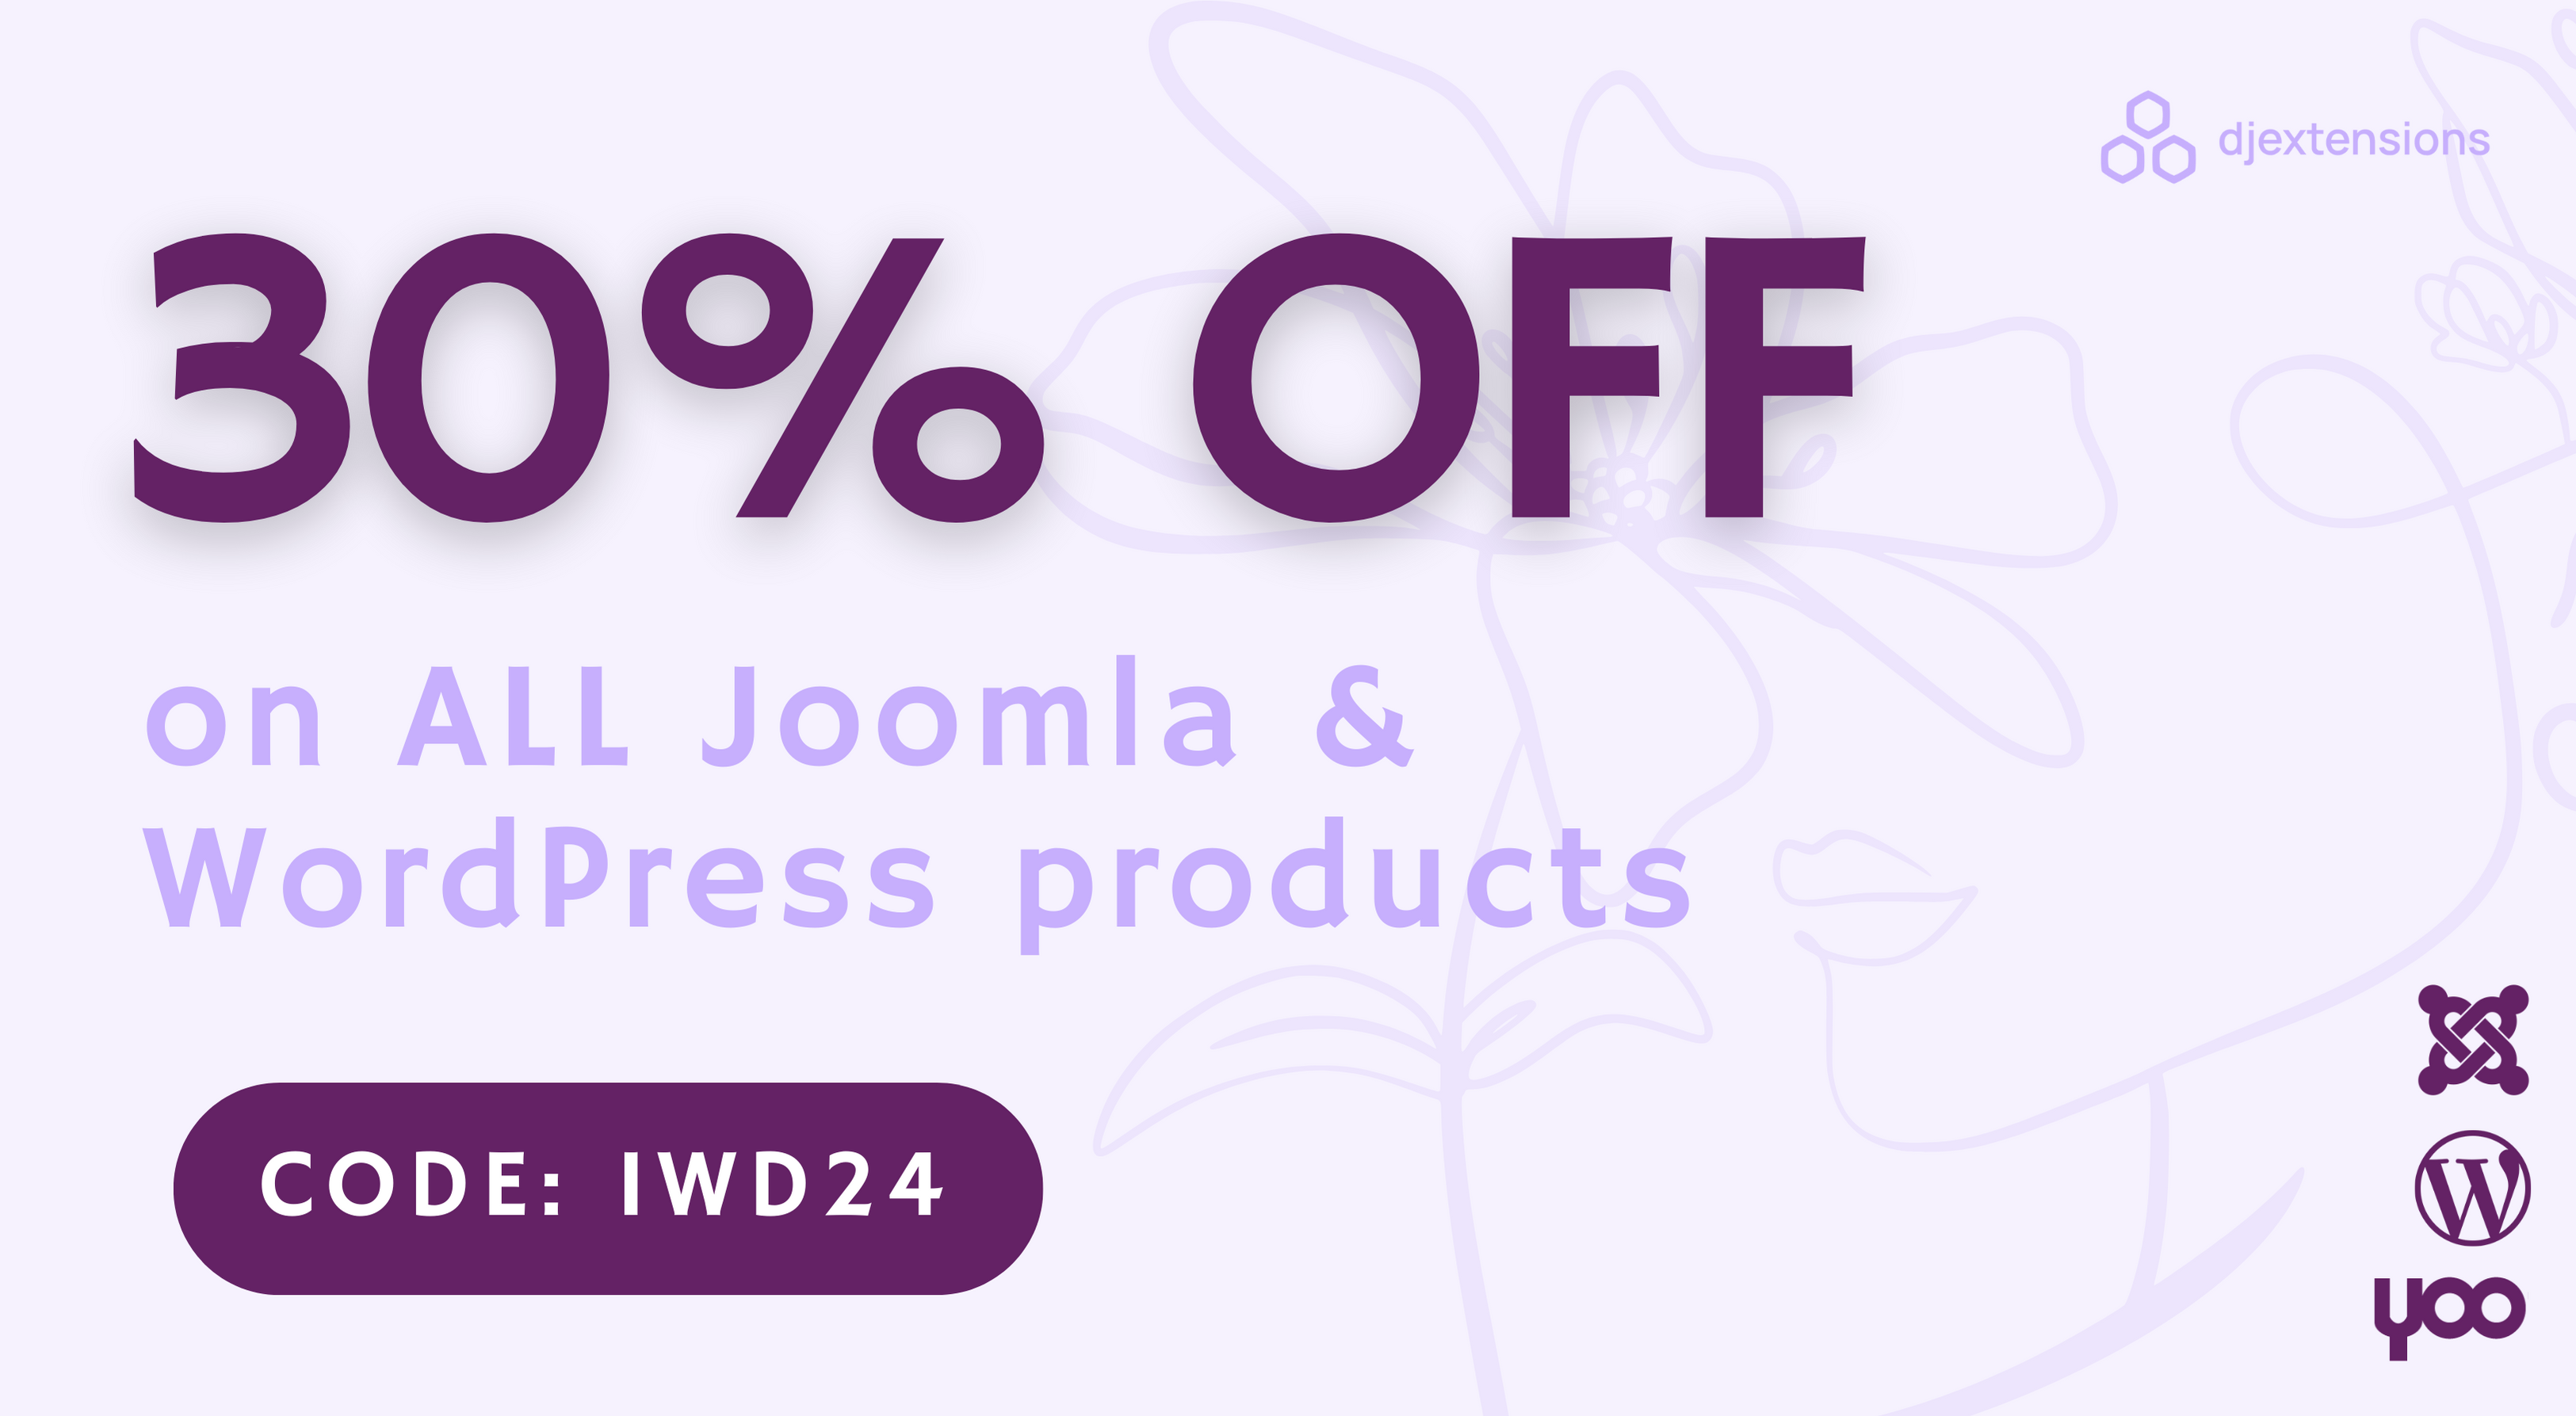 Special Offer for International Women's Day: Enjoy 30% OFF Everything!